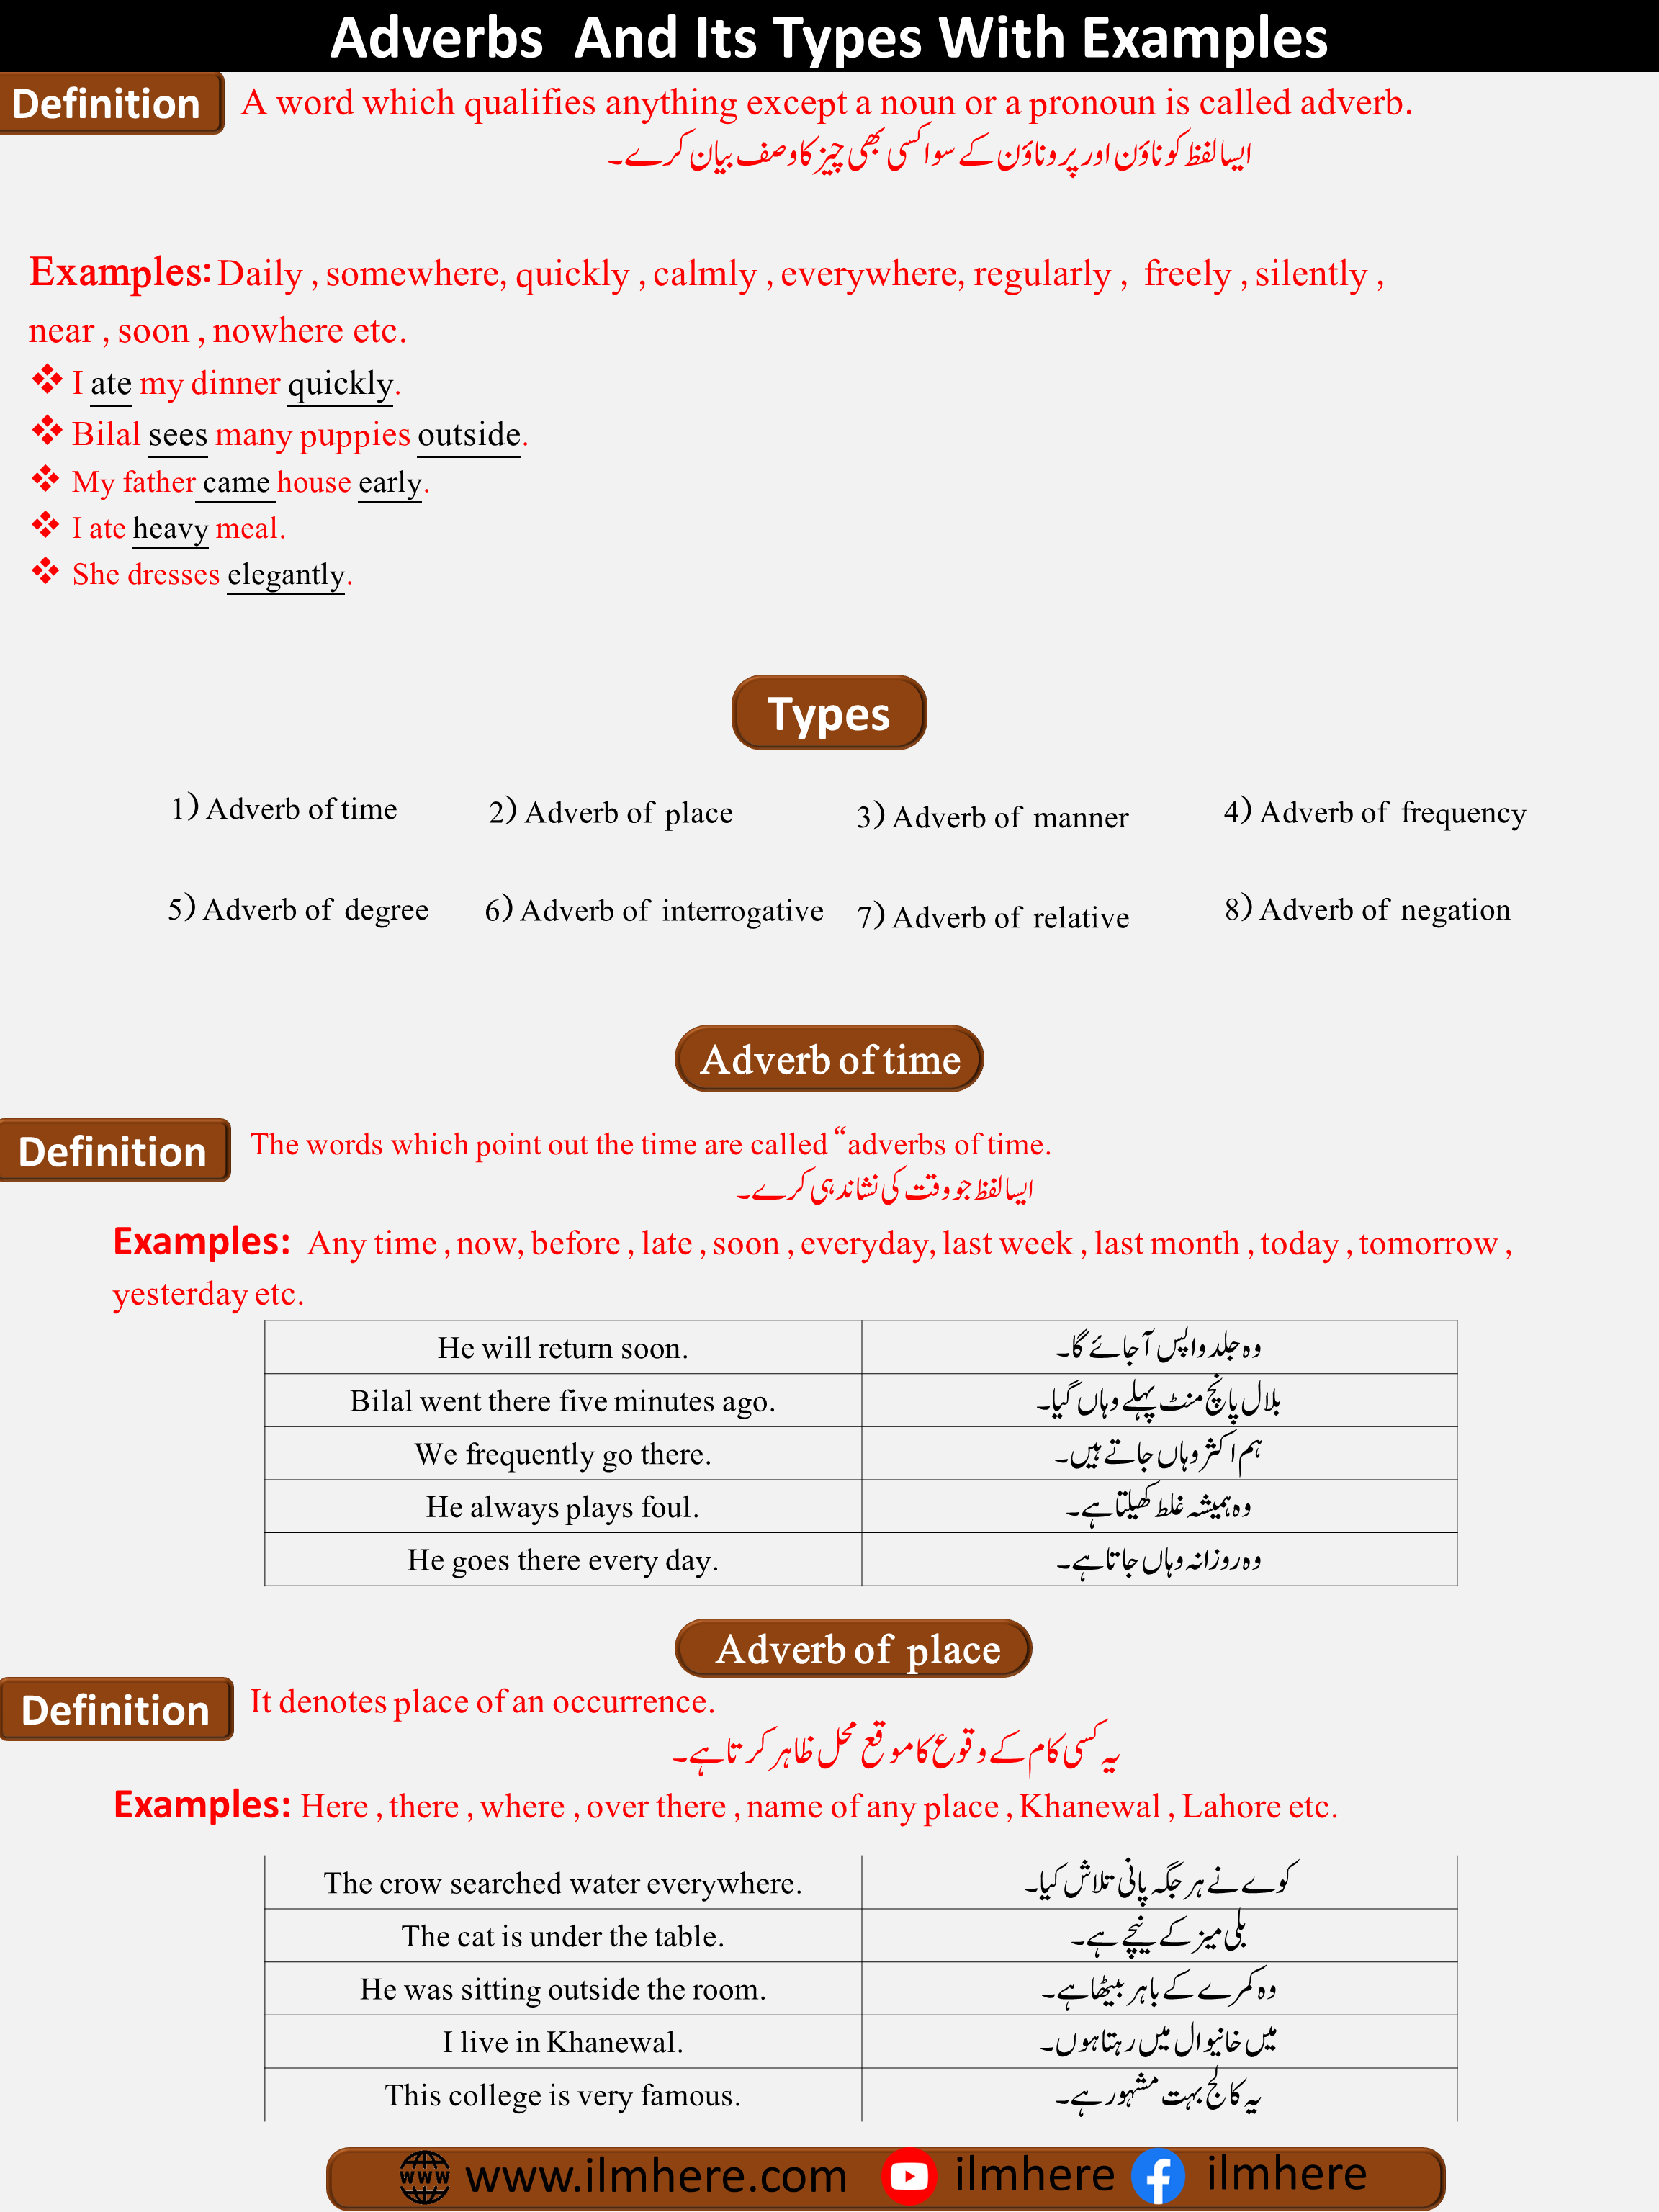 What is Adverb & Its Types of Adverb in Urdu and English\Hindi With Examples